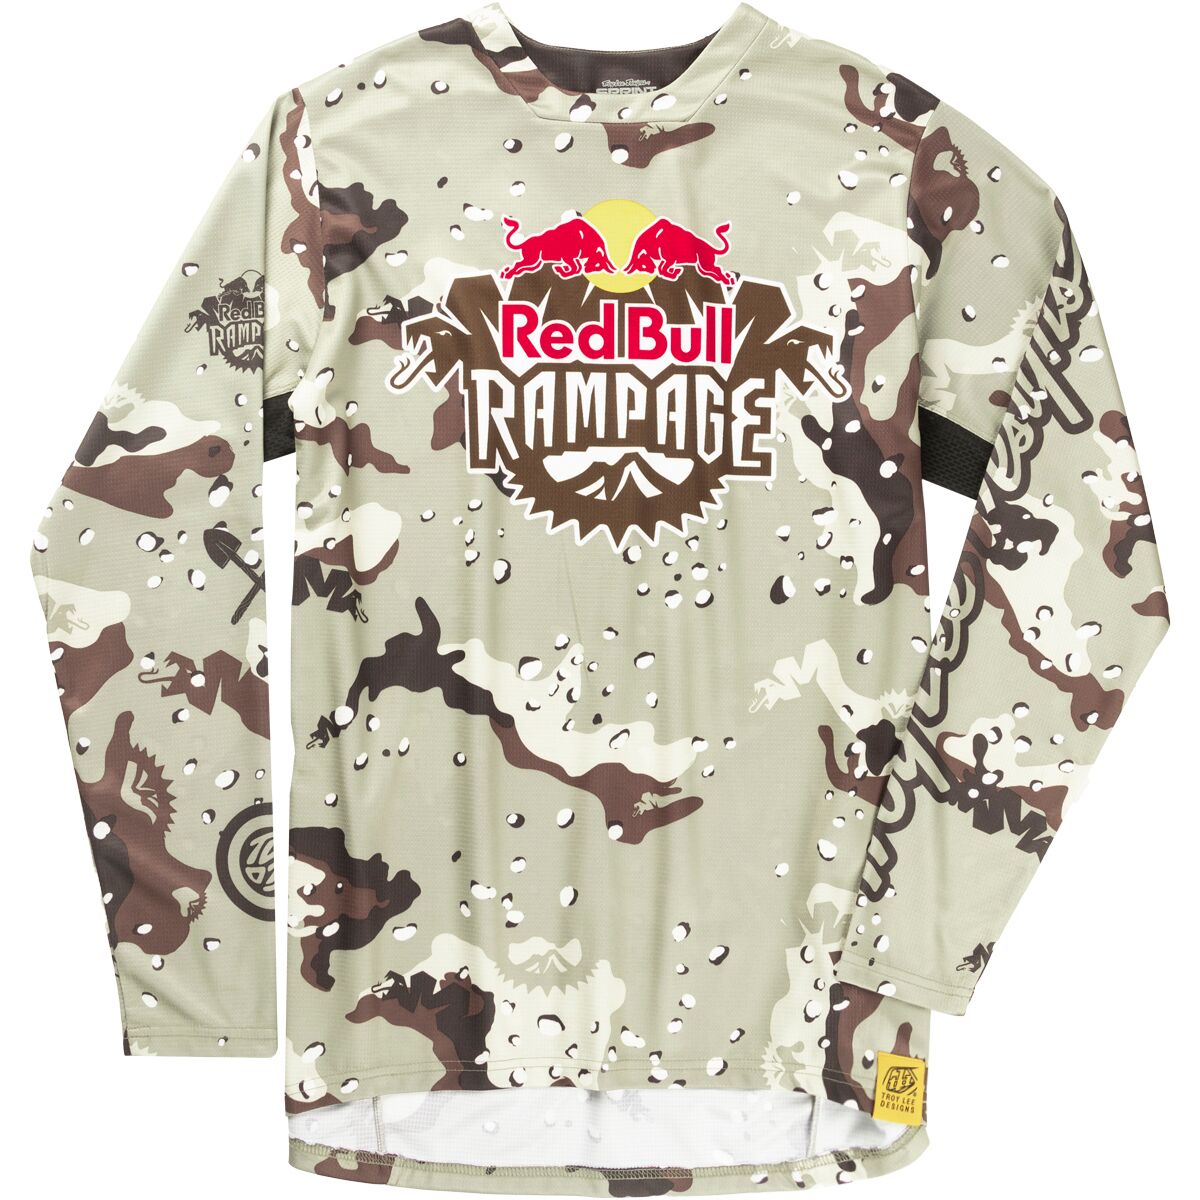 Red bull rampage limited edition clothing Red Bull Rampage limited ed